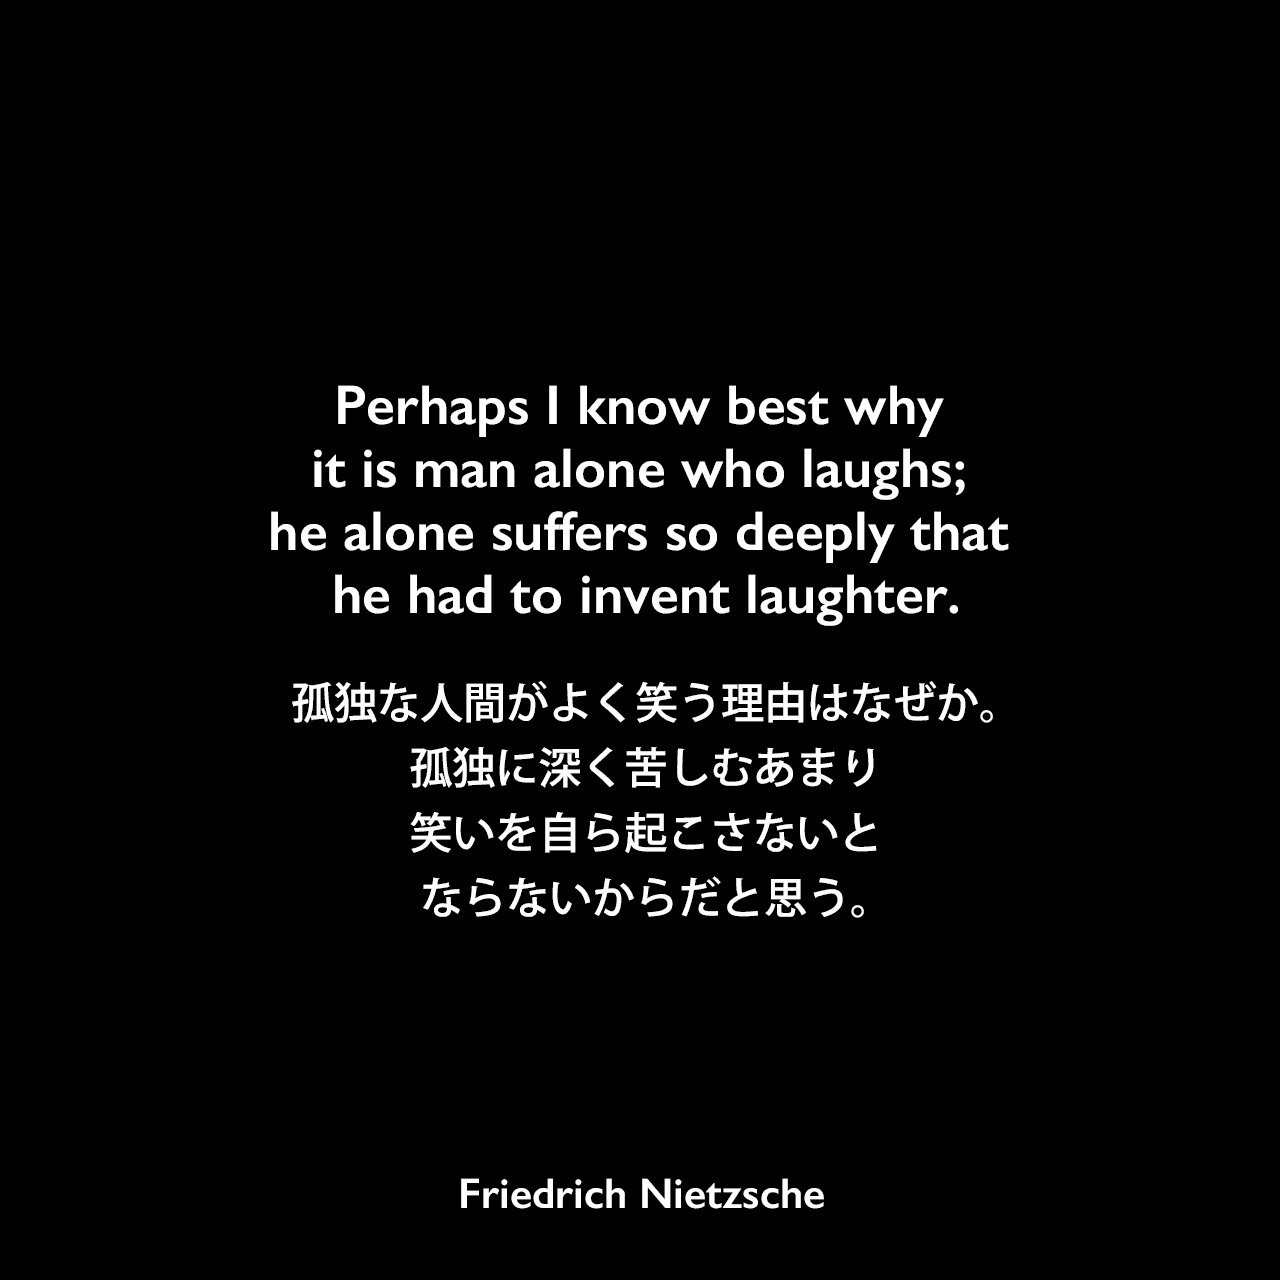 Perhaps I know best why it is man alone who laughs; he alone suffers so deeply that he had to invent laughter.孤独な人間がよく笑う理由はなぜか。孤独に深く苦しむあまり、笑いを自ら起こさないとならないからだと思う。Friedrich Nietzsche